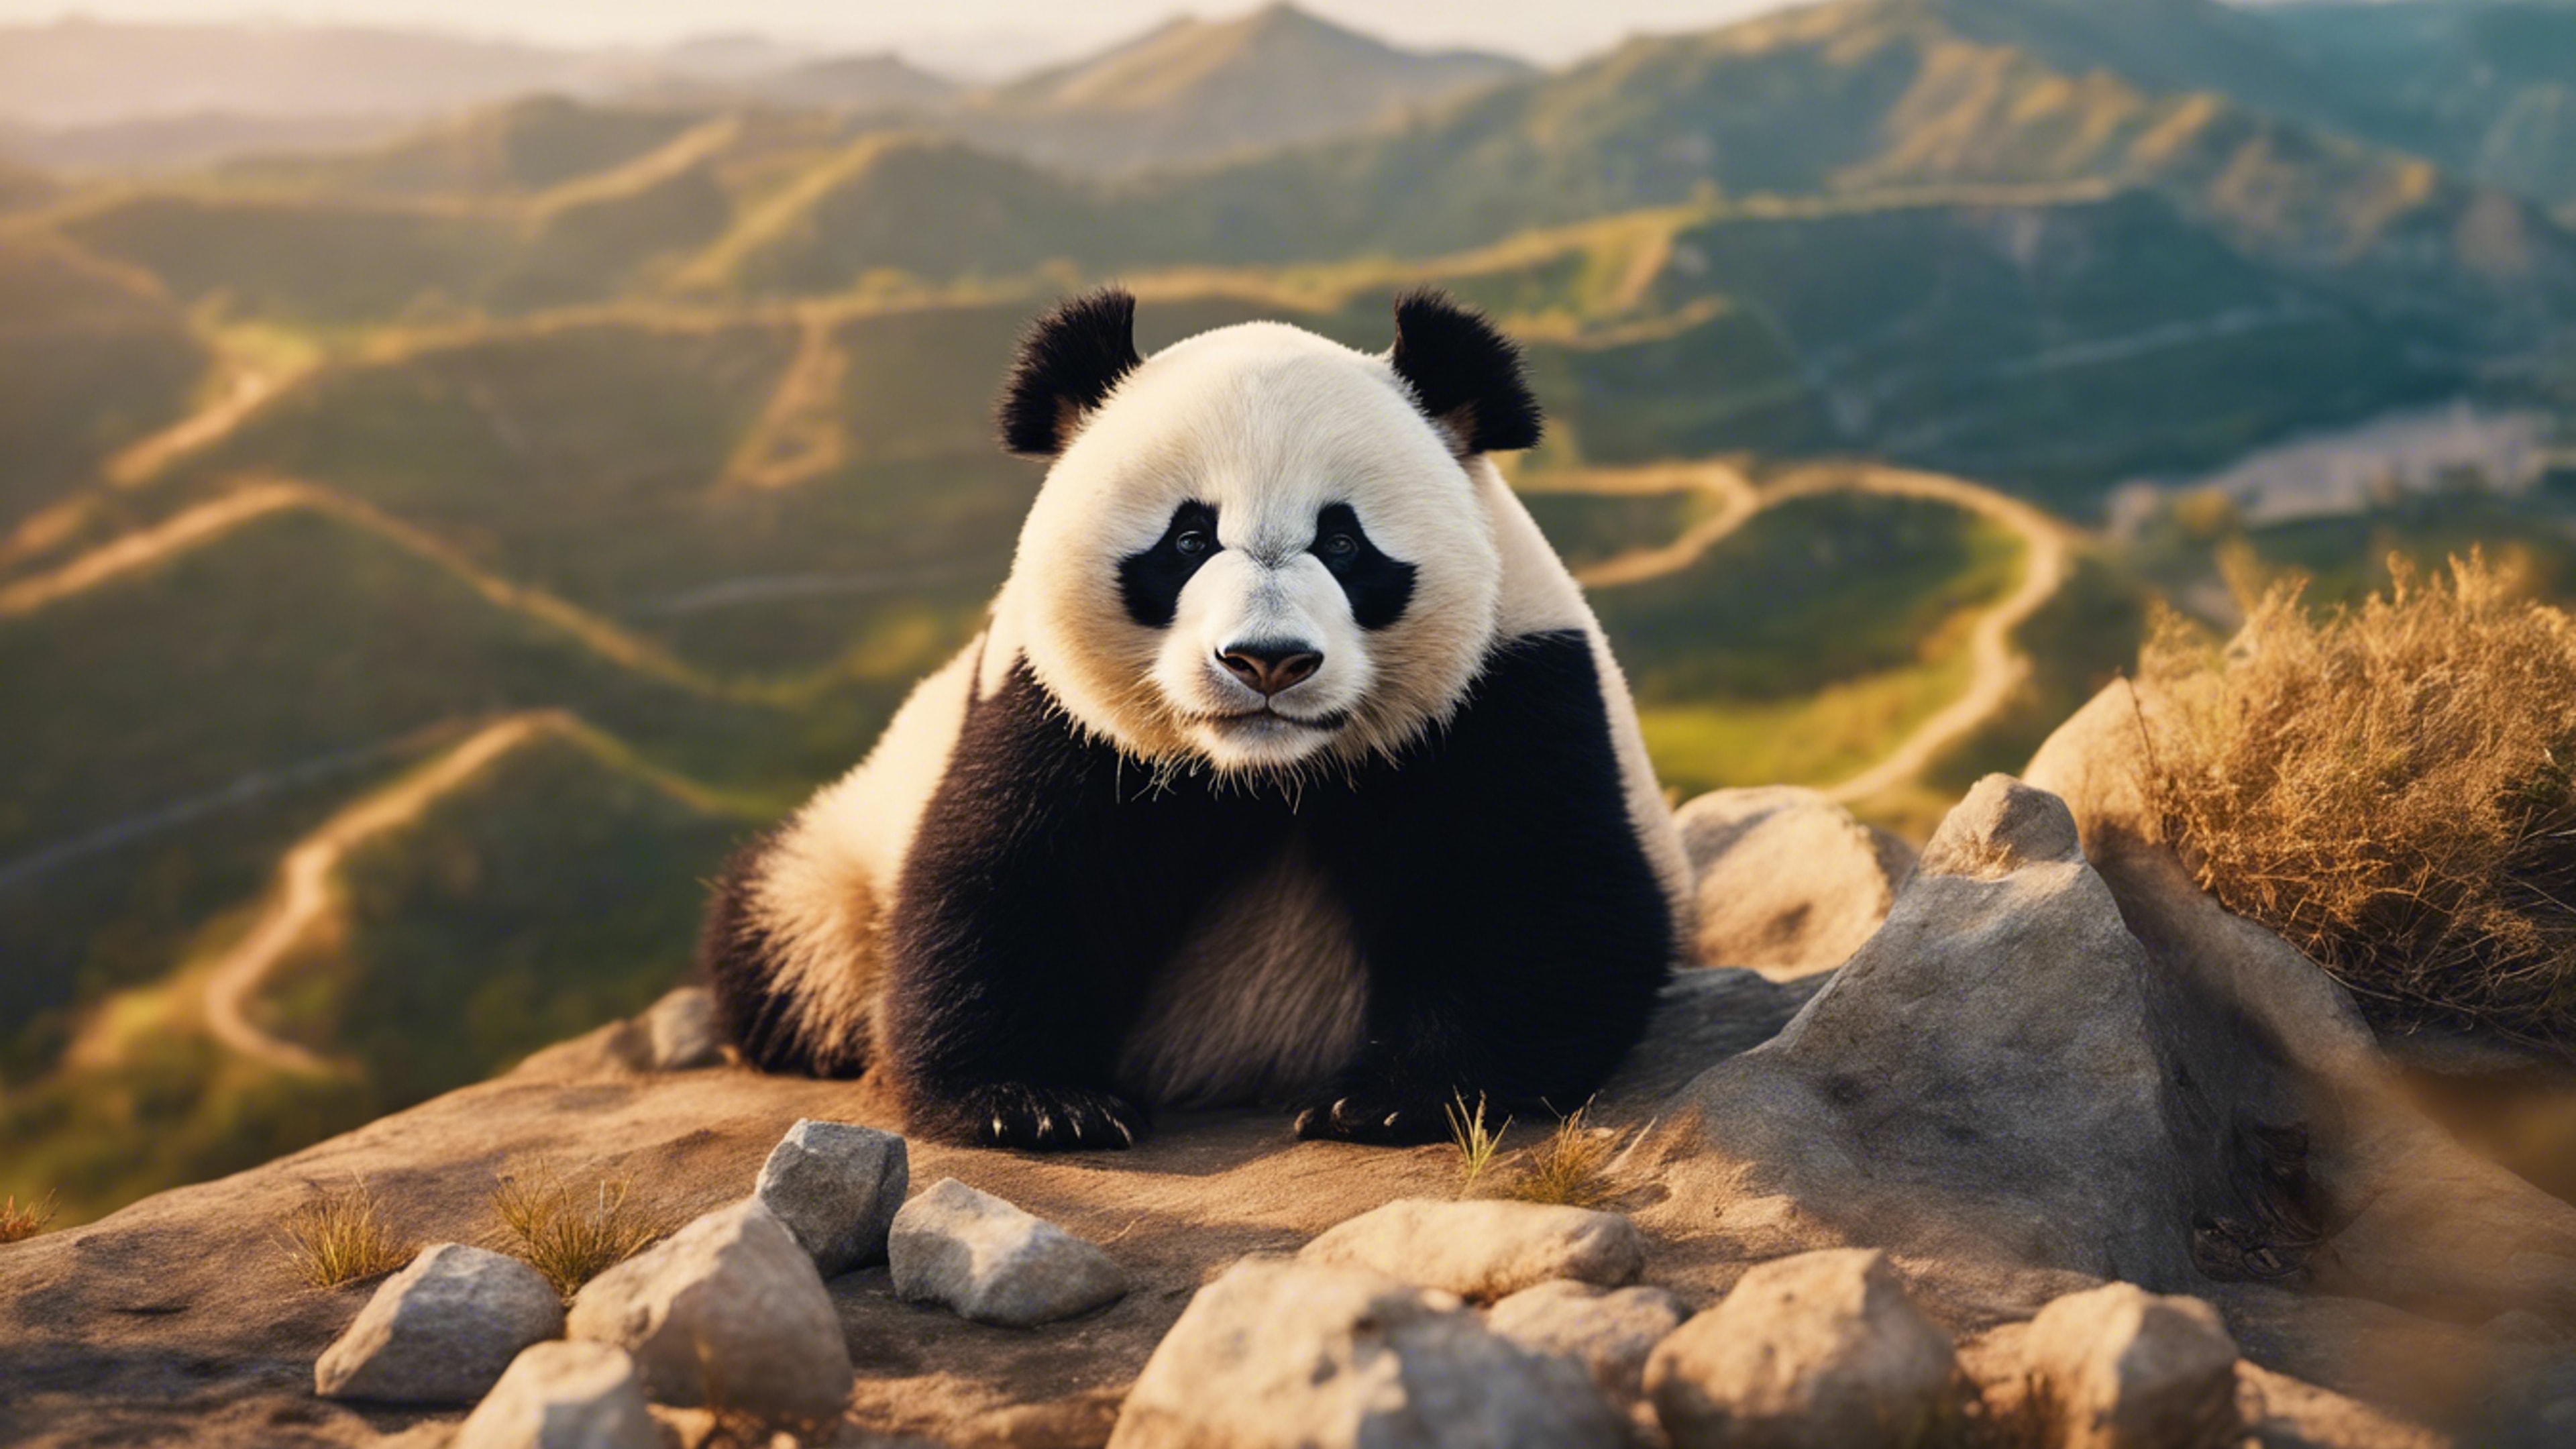 A proud panda basking in the warm sunlight, on a cliff overlooking a wide, beautiful valley. Tapeta[f1b4c4cbced14ad39a34]